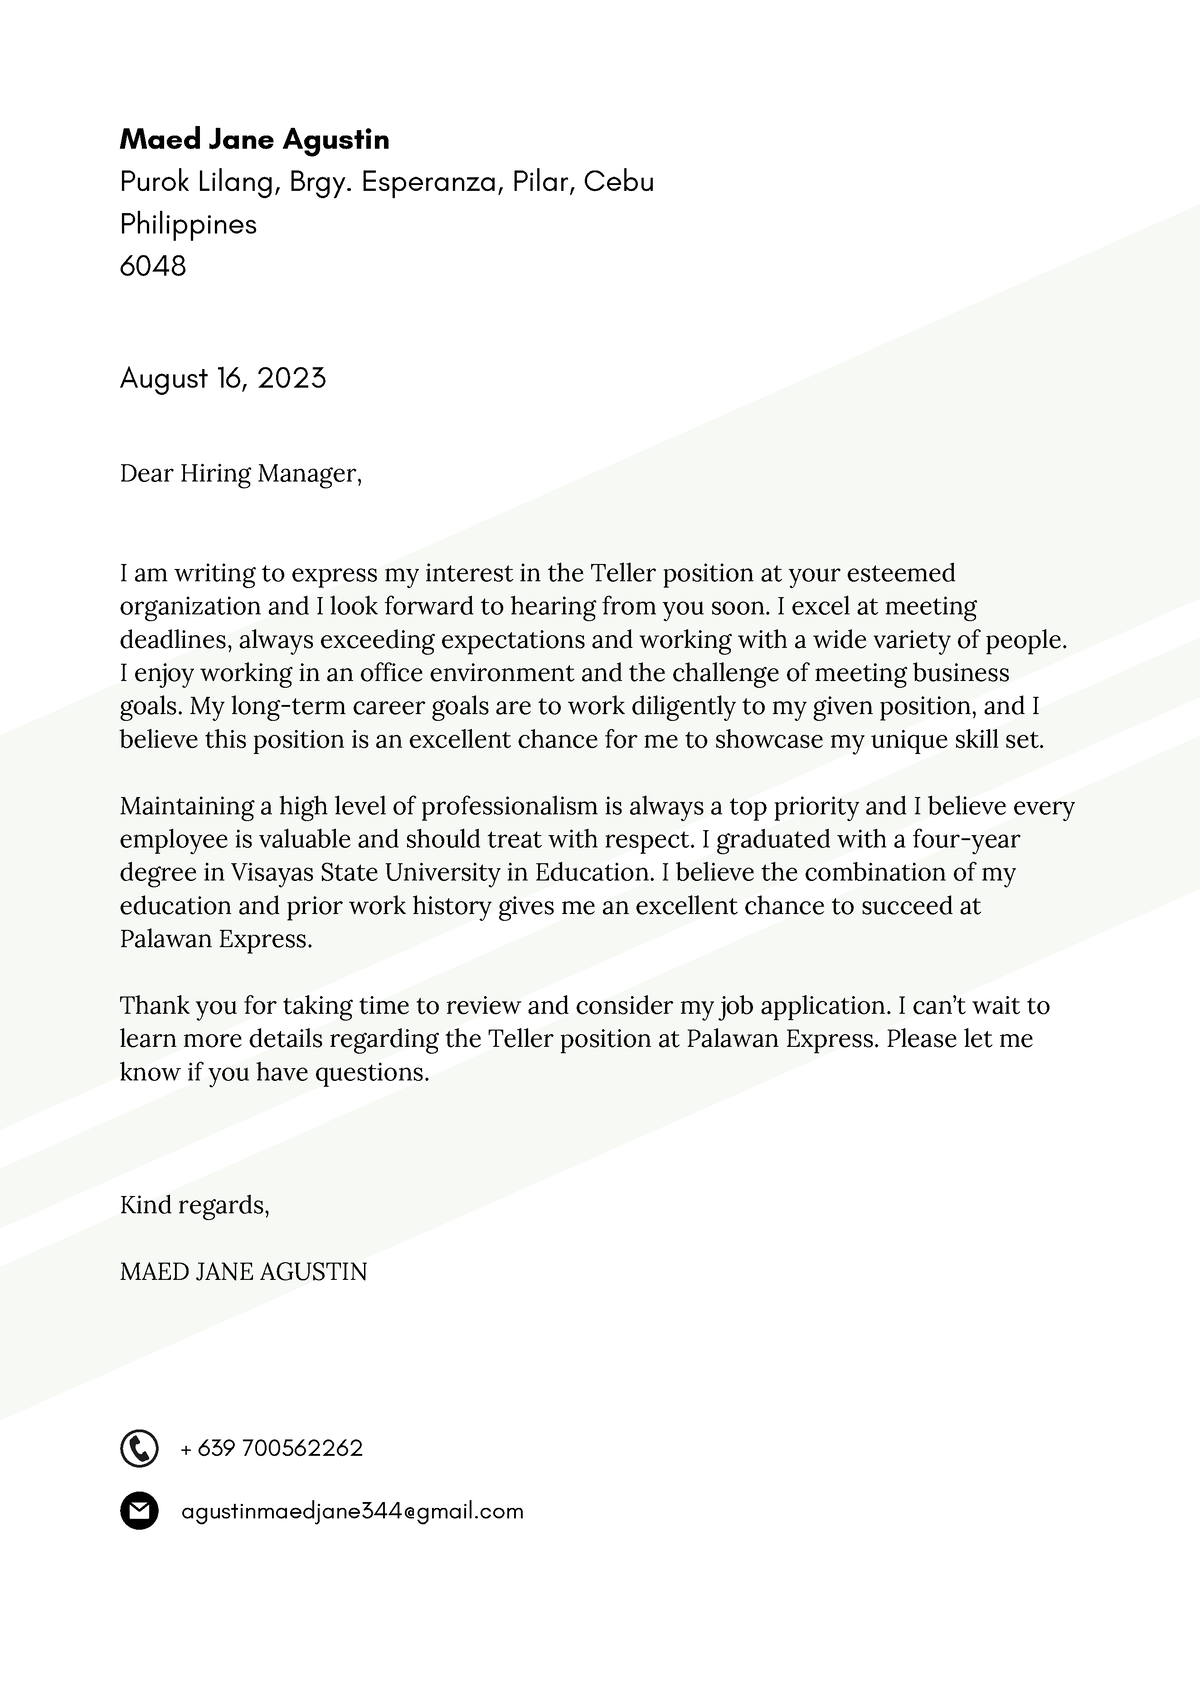 Palawan Cover Letter Example - Dear Hiring Manager, I am writing to ...